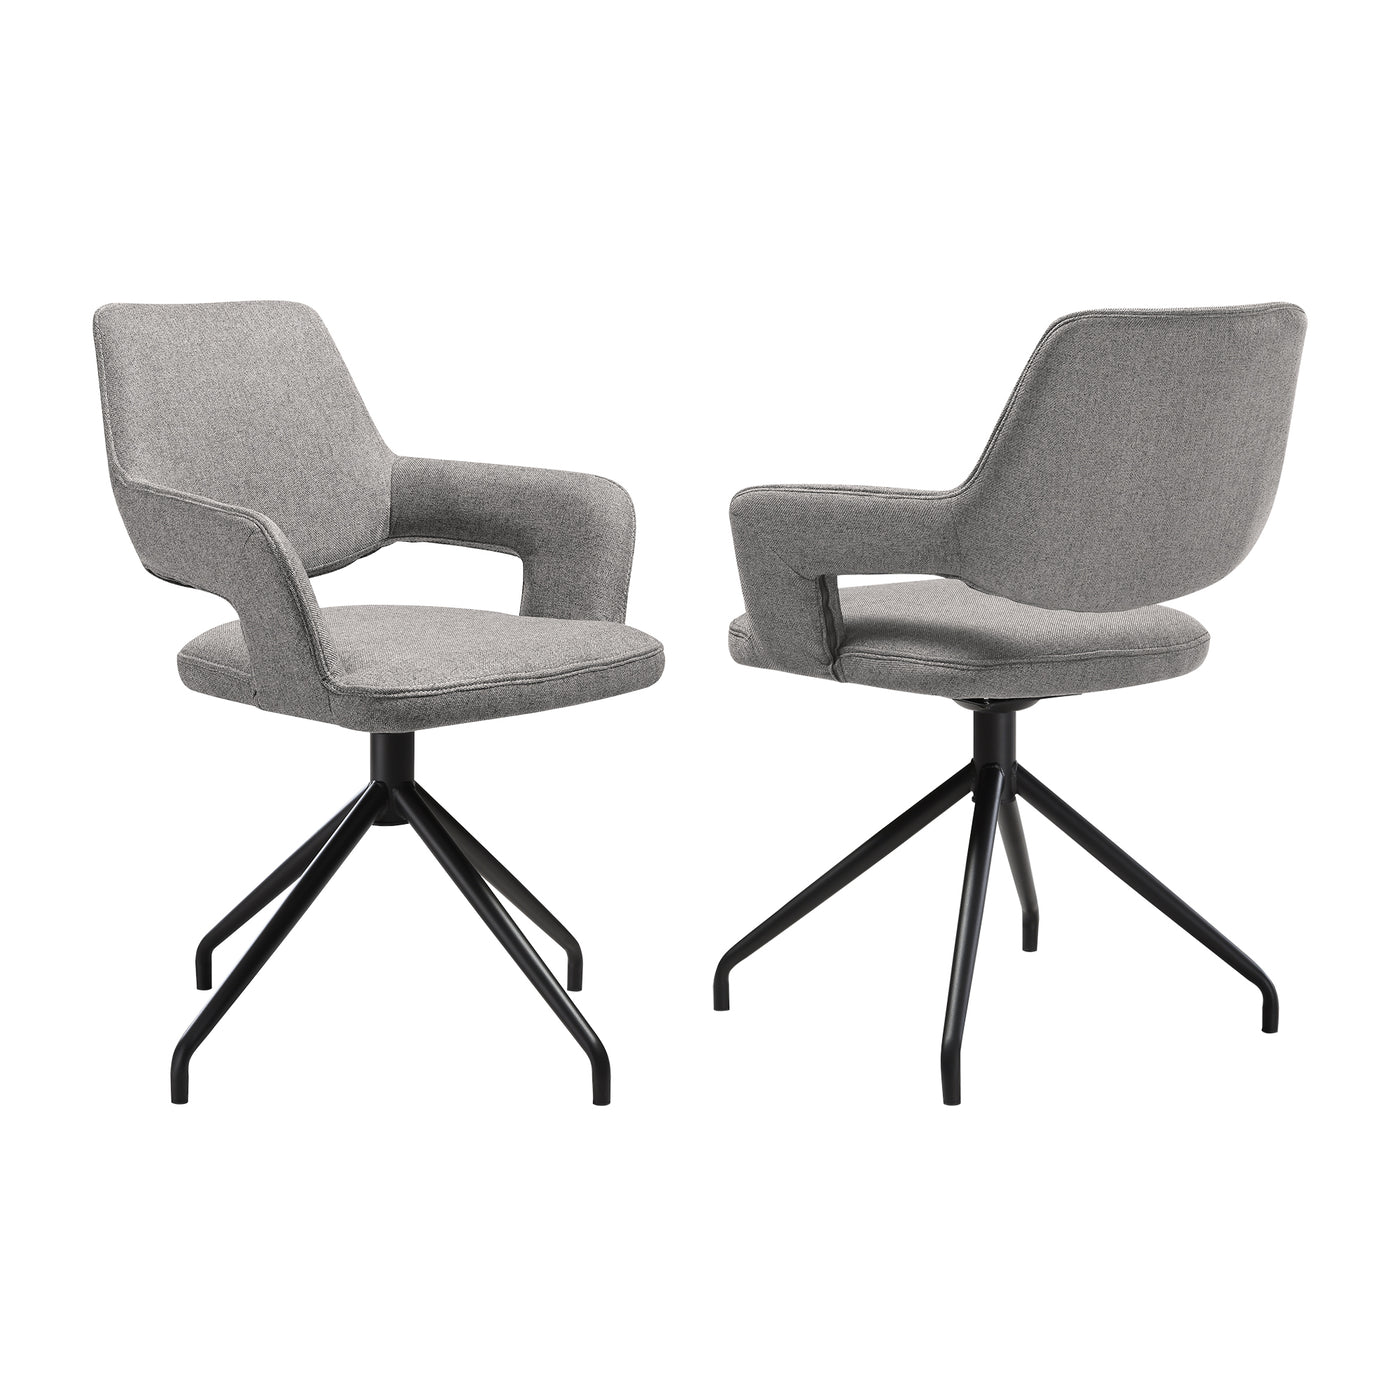 Penny Swivel Upholstered Dining Chair Set of 2